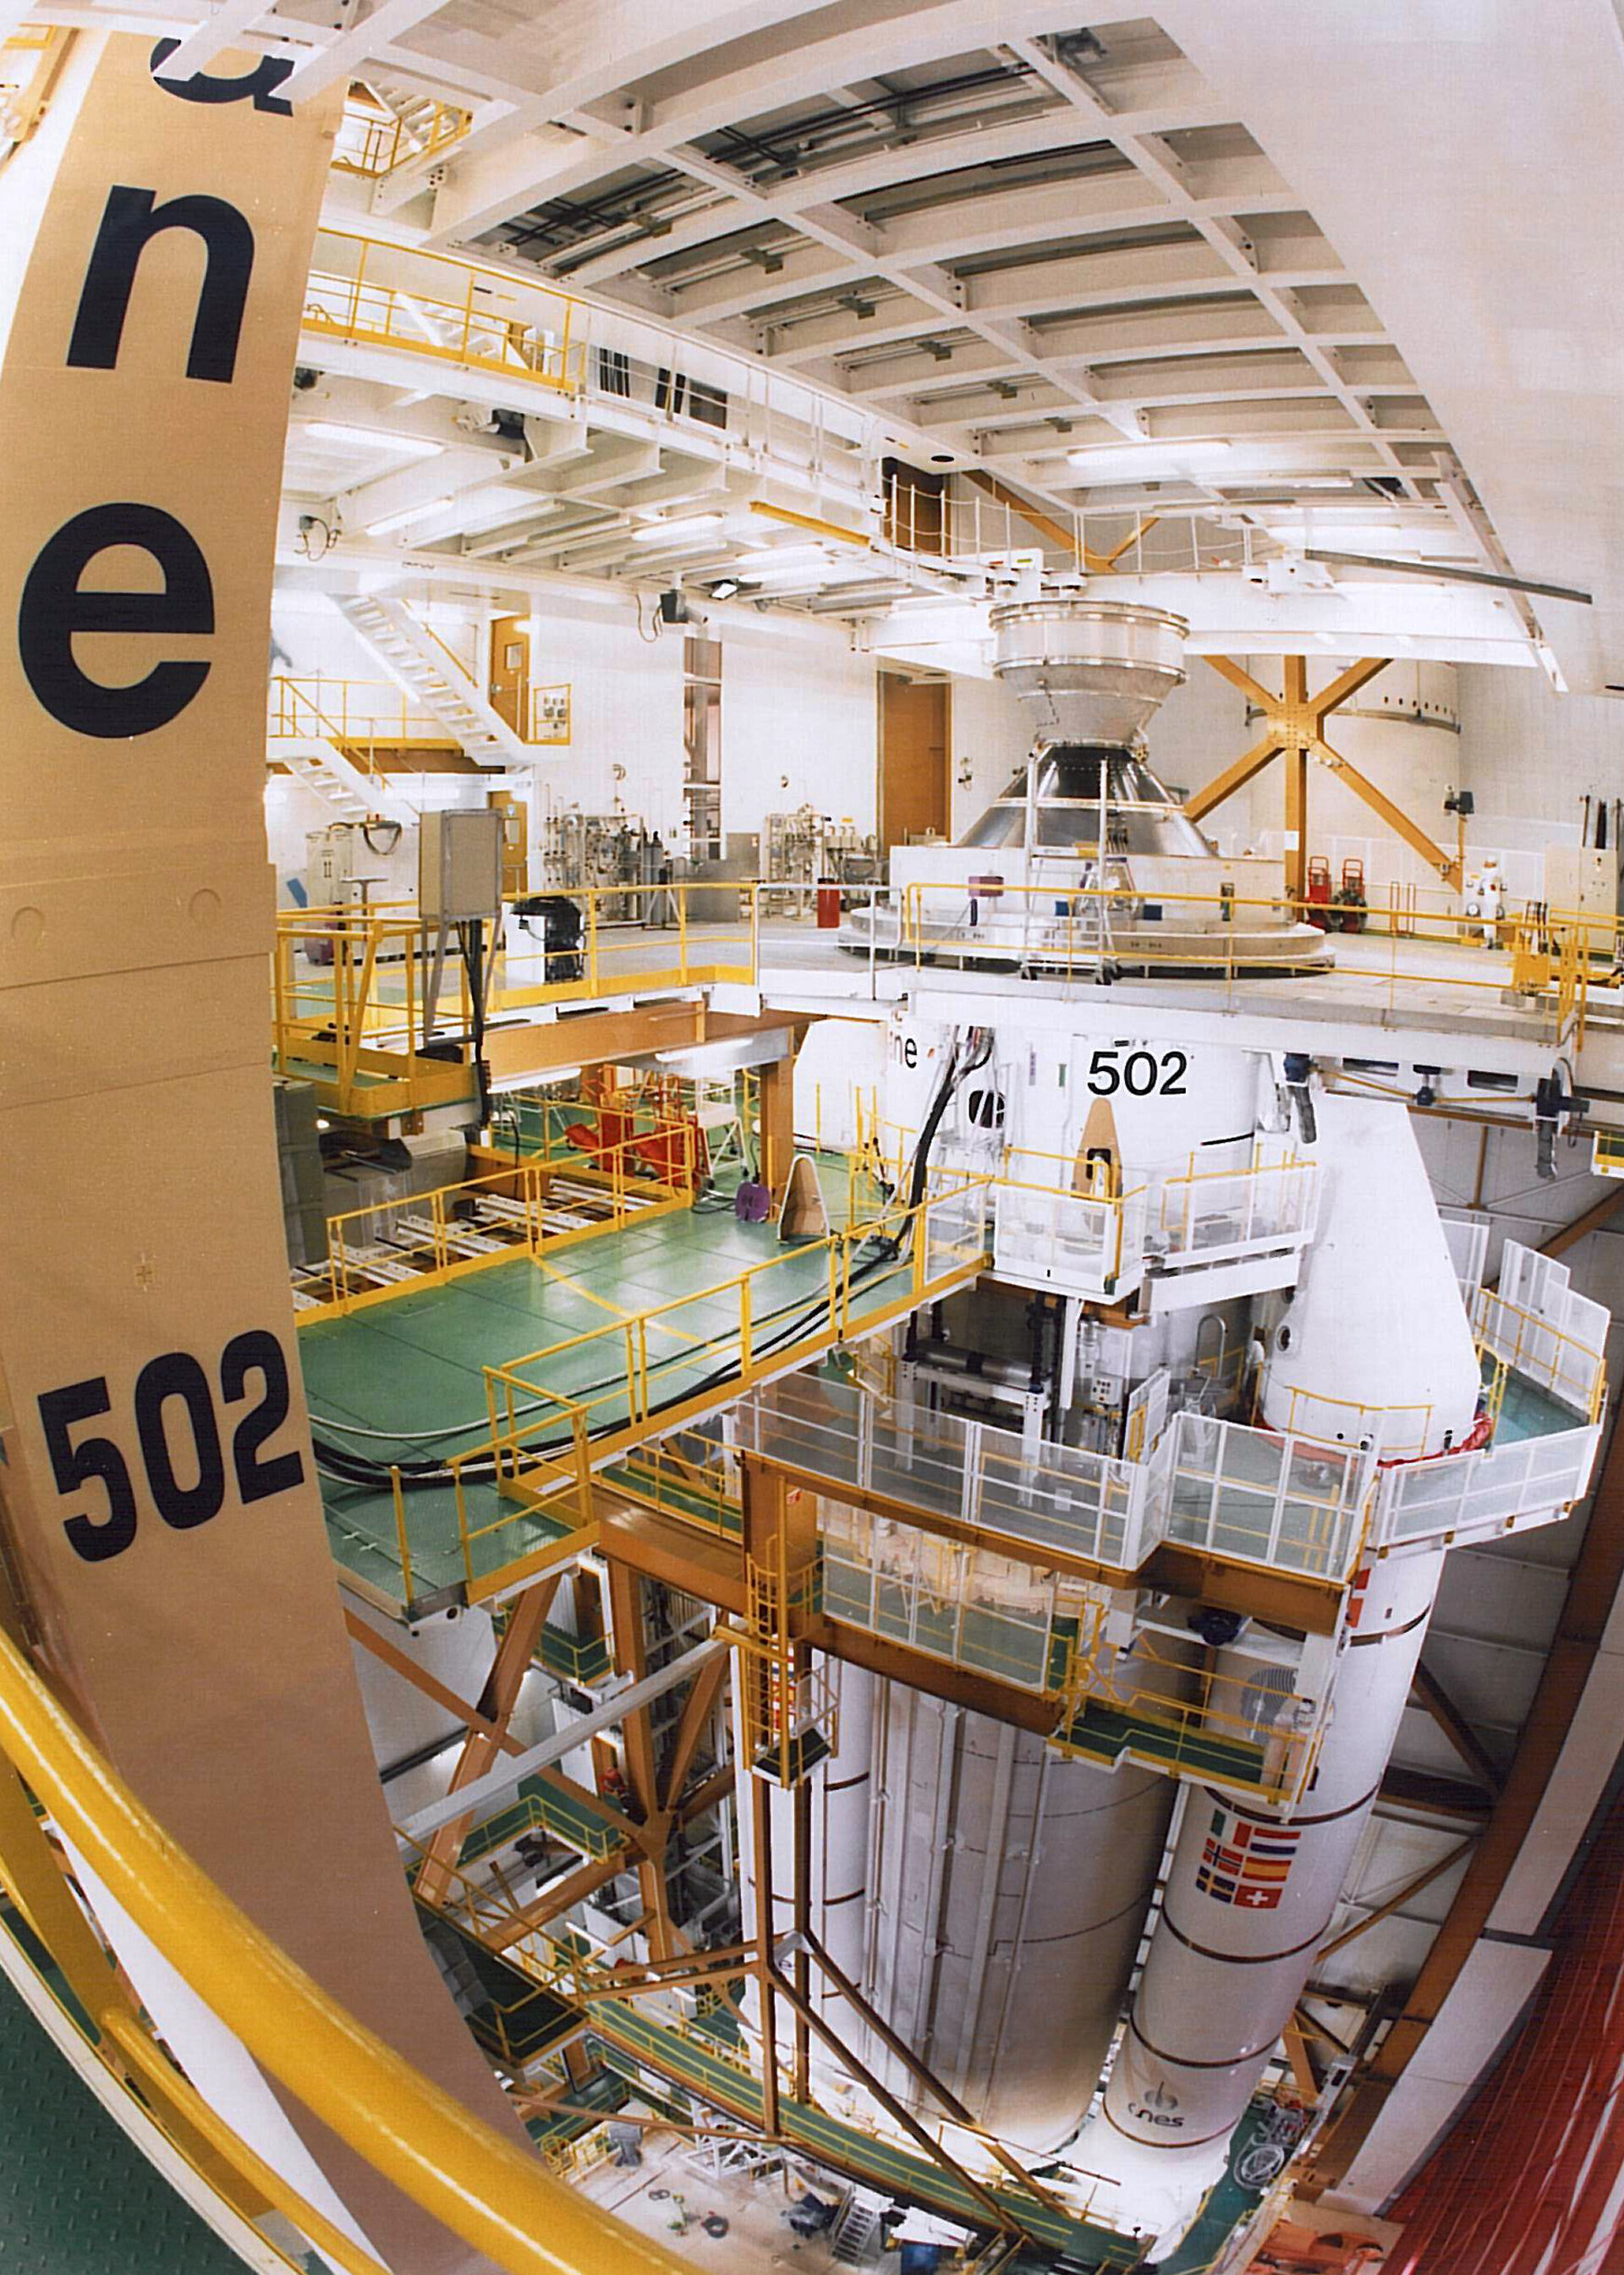 Ariane 502 in the final stage of preparation, 1997